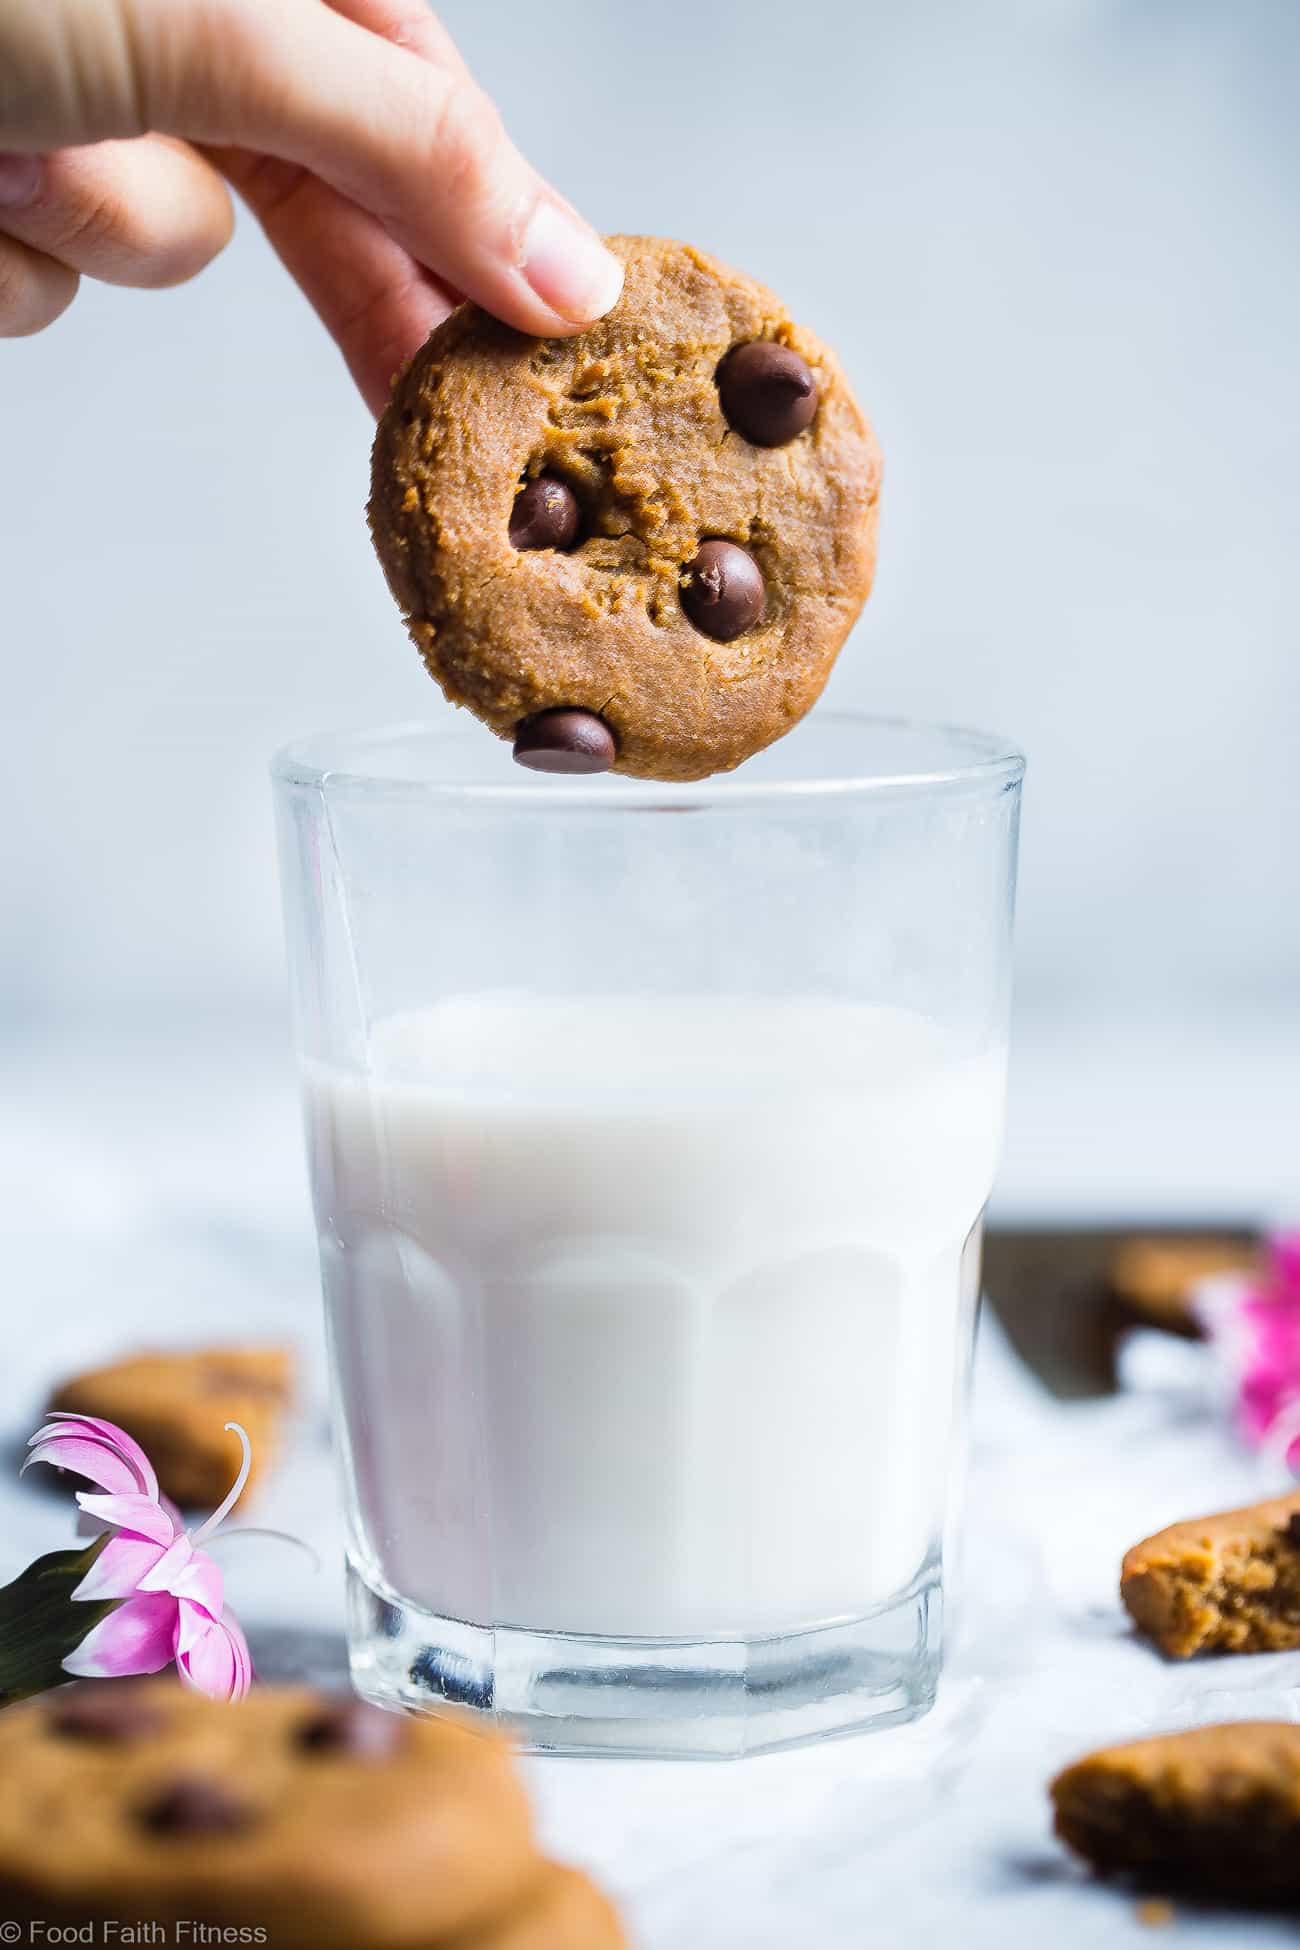 Peanut Butter Chickpea Chocolate Chip Cookie Recipe - These kid-friendly, vegan cookies are SO soft and chewy! You would never believe they are healthy and gluten/grain/dairy/egg AND refined sugar free! | Foodfaithfitness.com | @FoodFaithFit